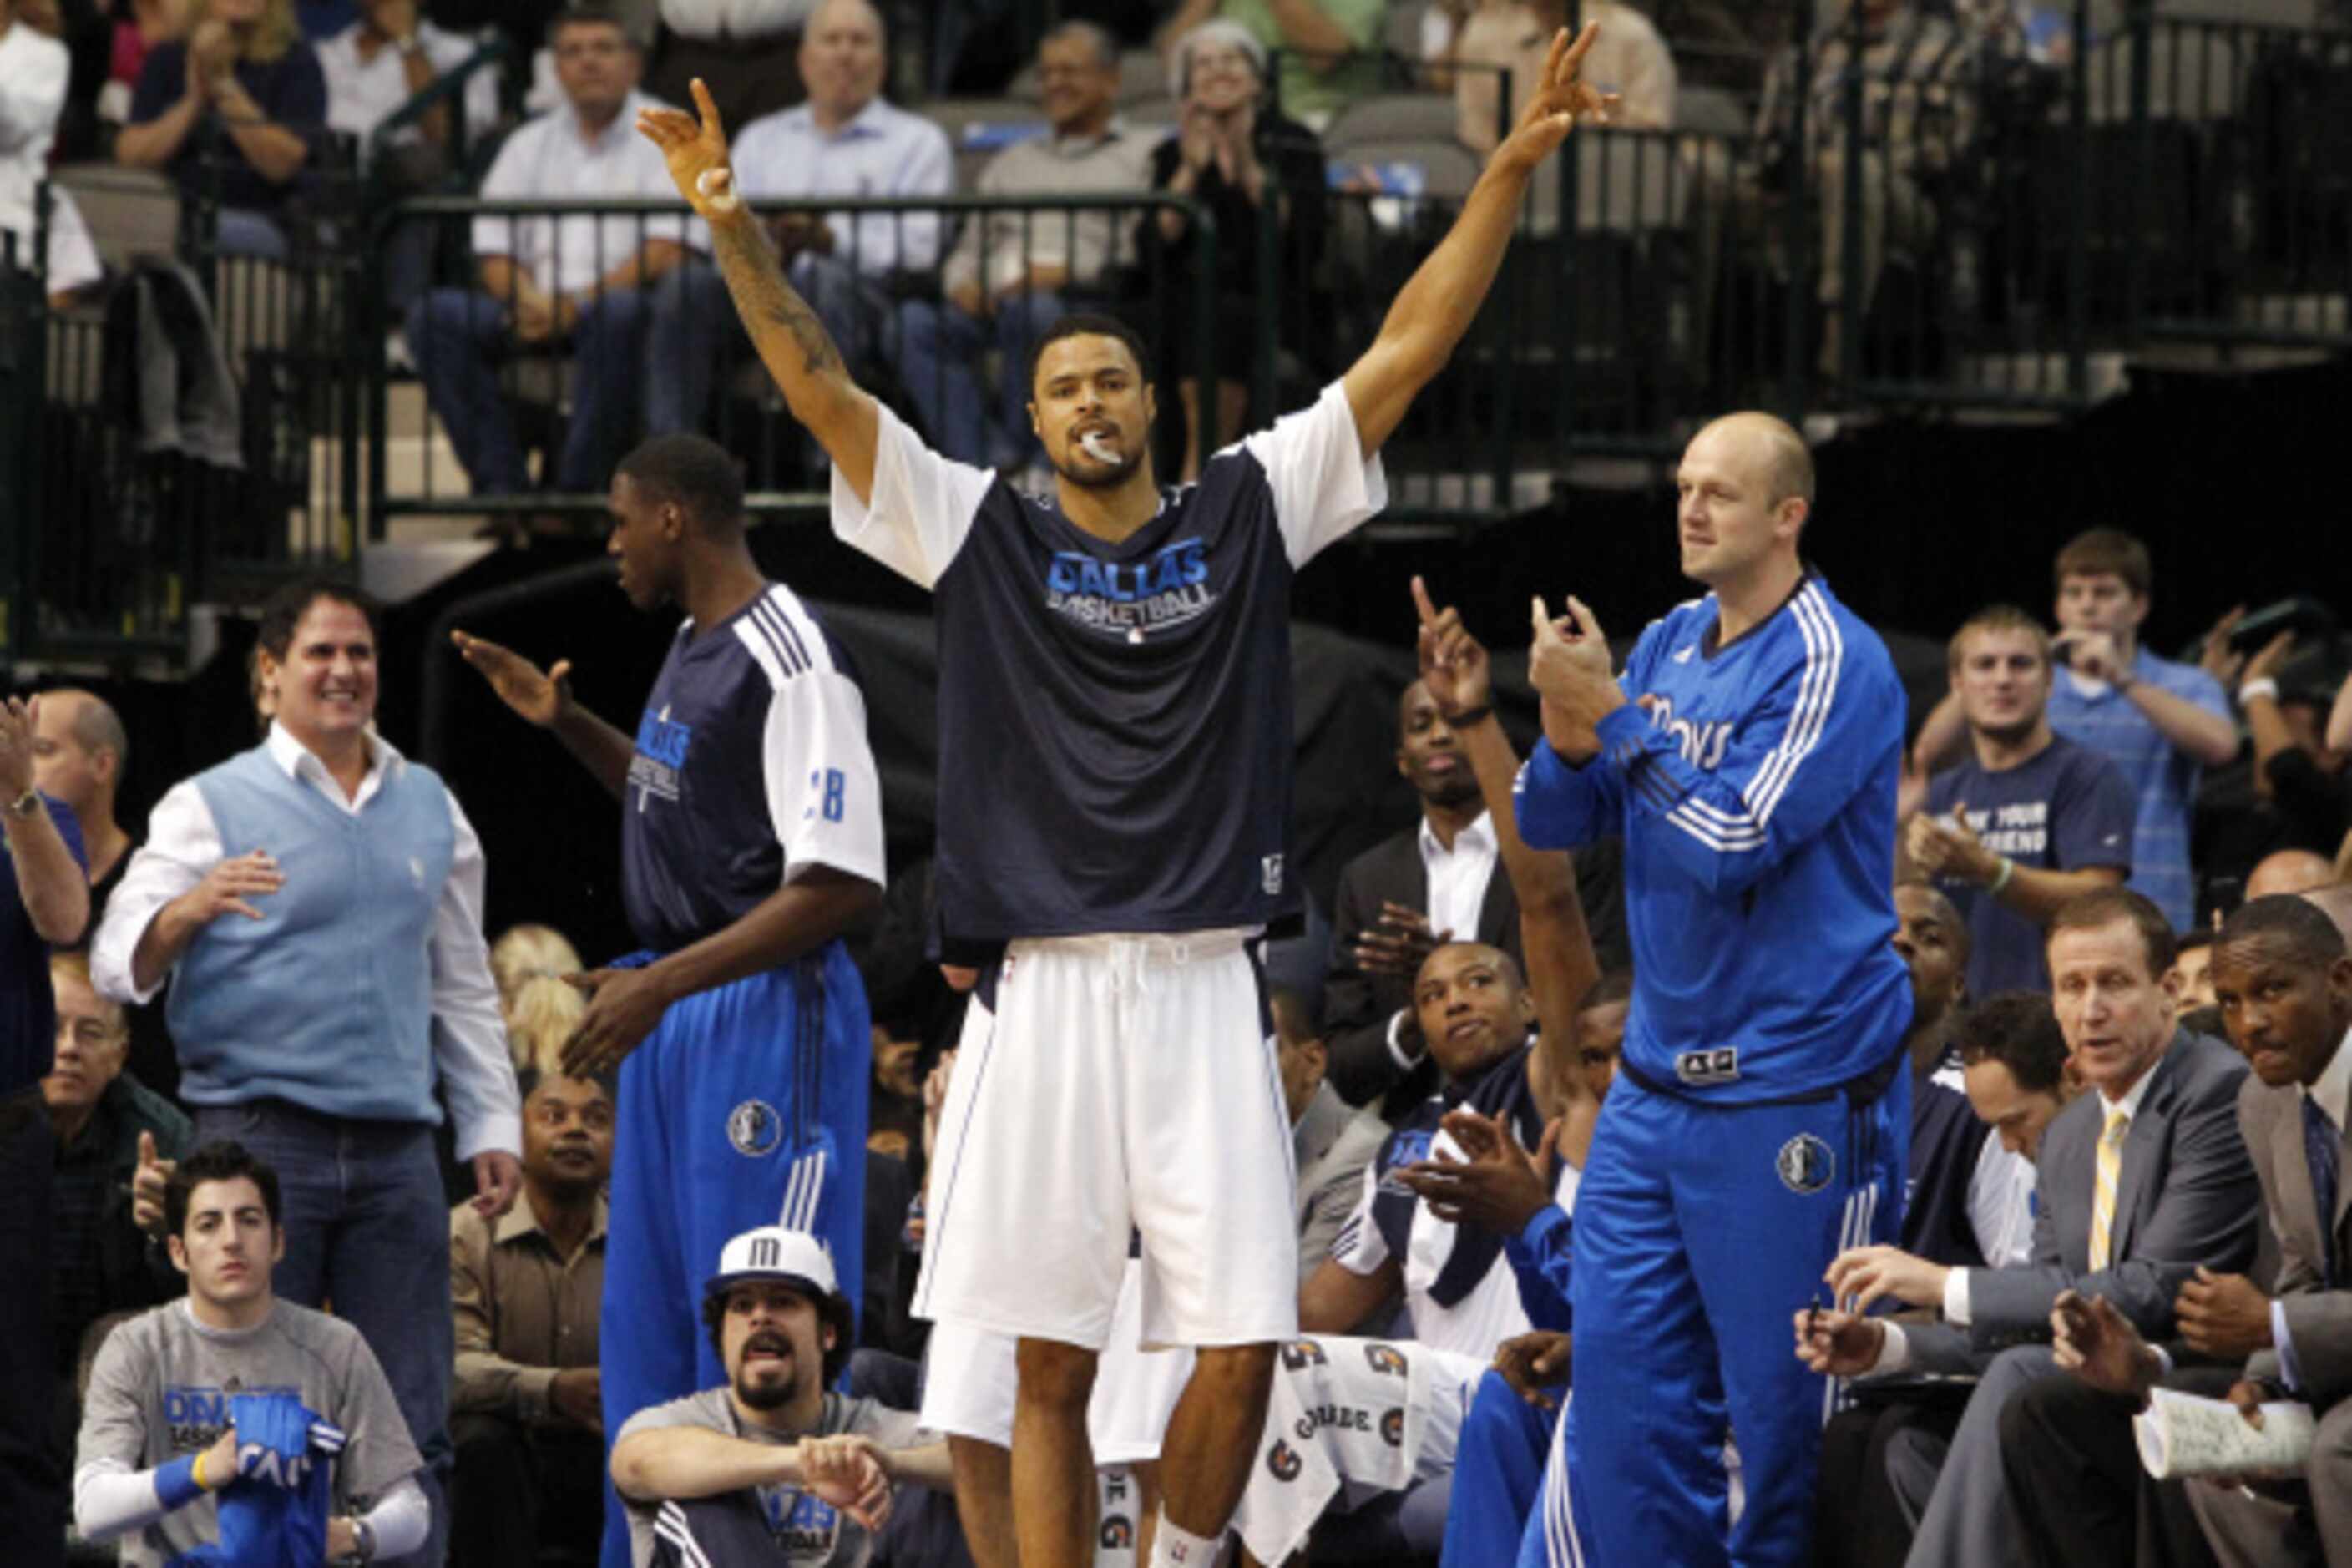 Oct. 27: Mavs open the regular season with a 101-86 home victory over Charlotte.